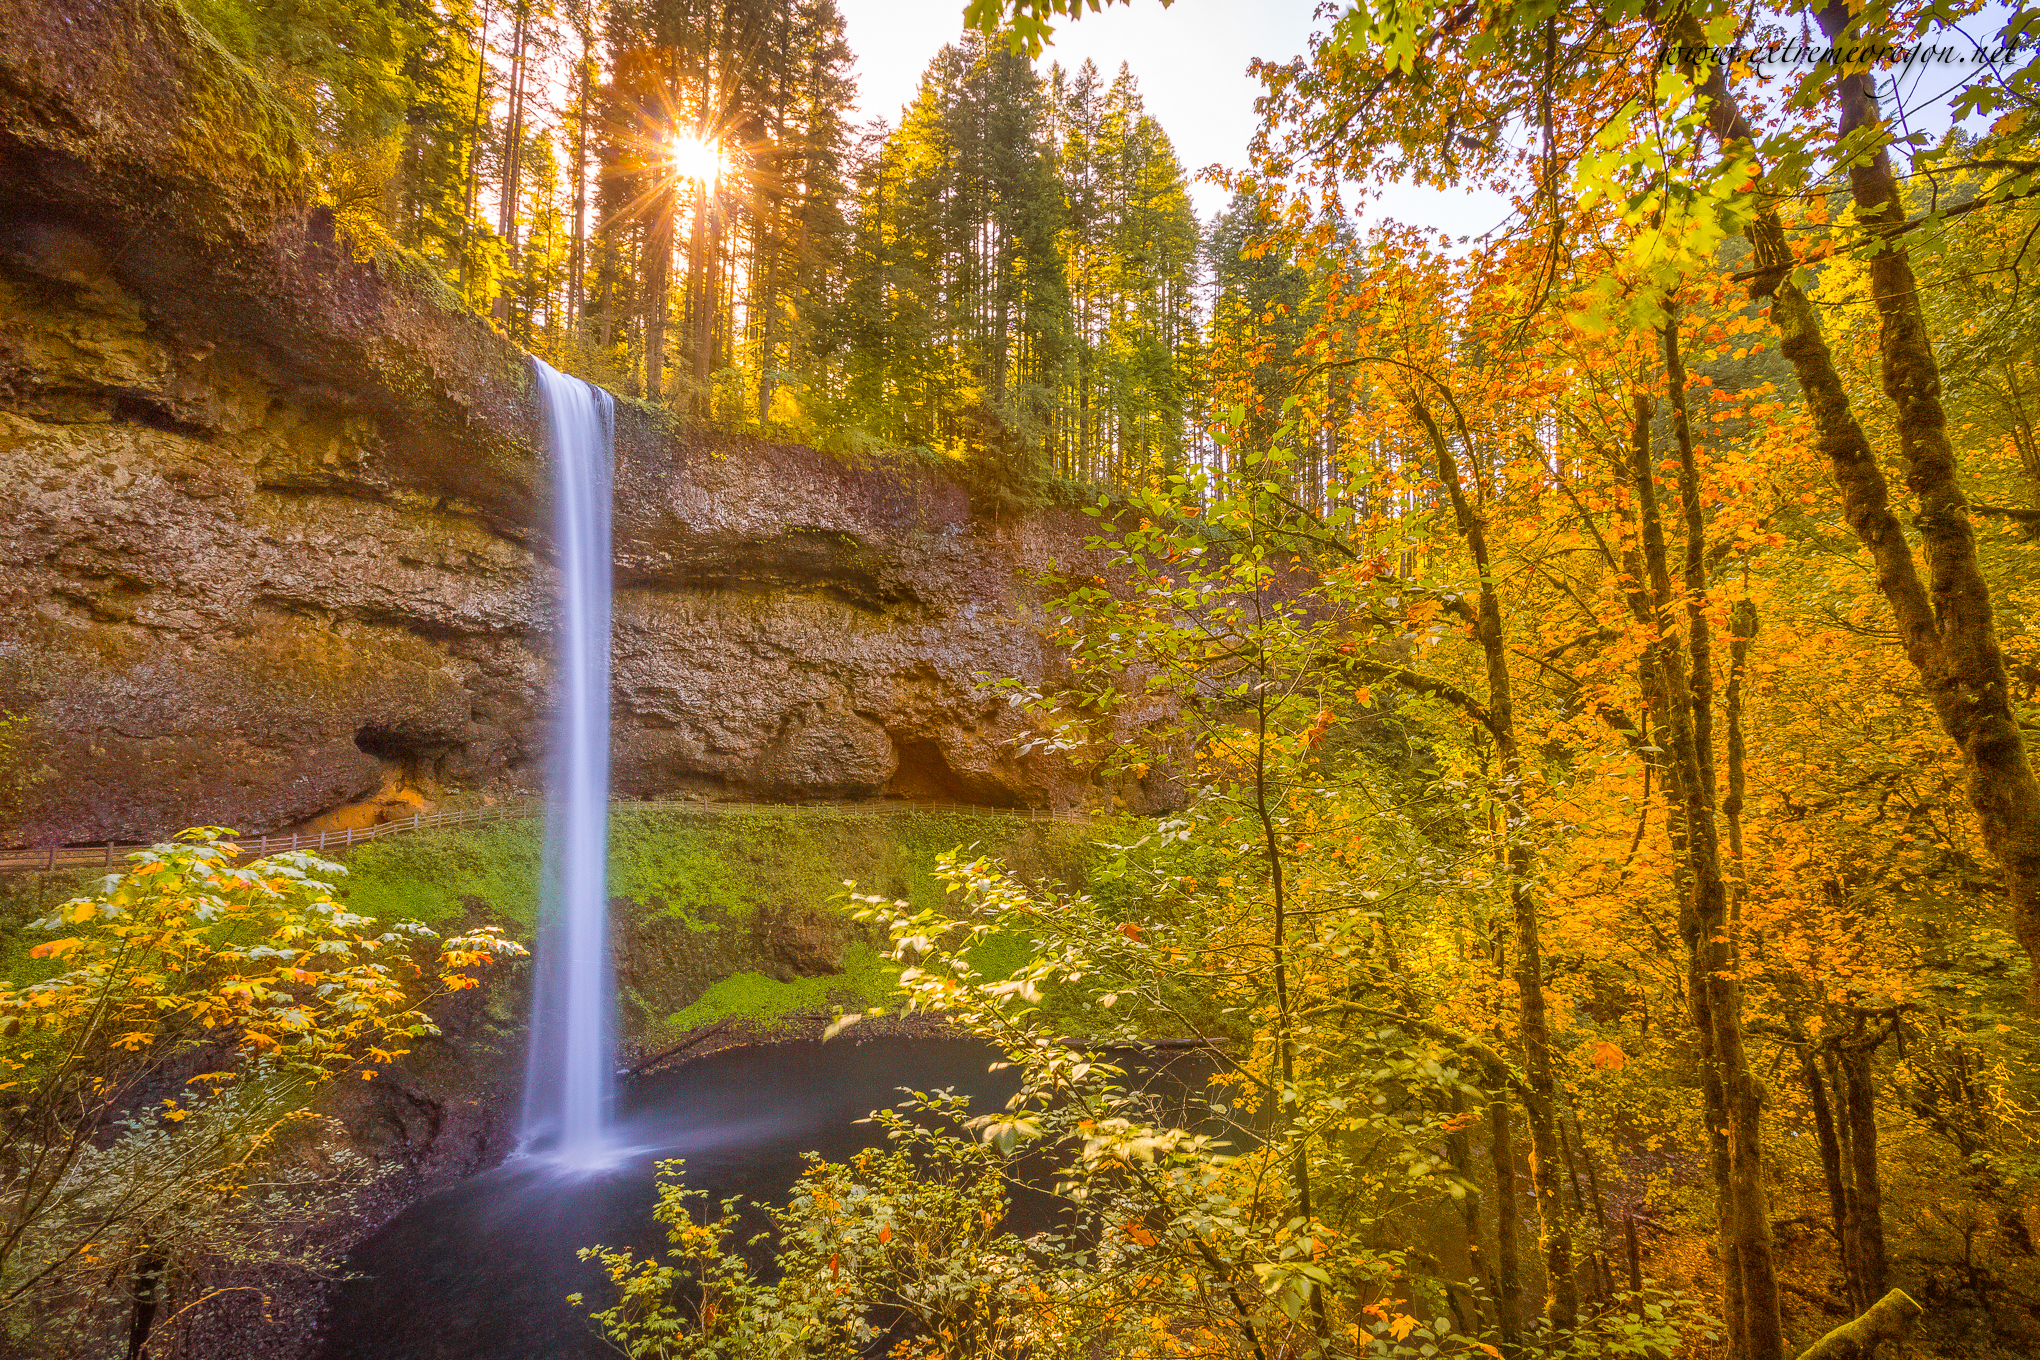 Silver Falls in autumn with orange leaves. Truly one of the best places in Oregon.